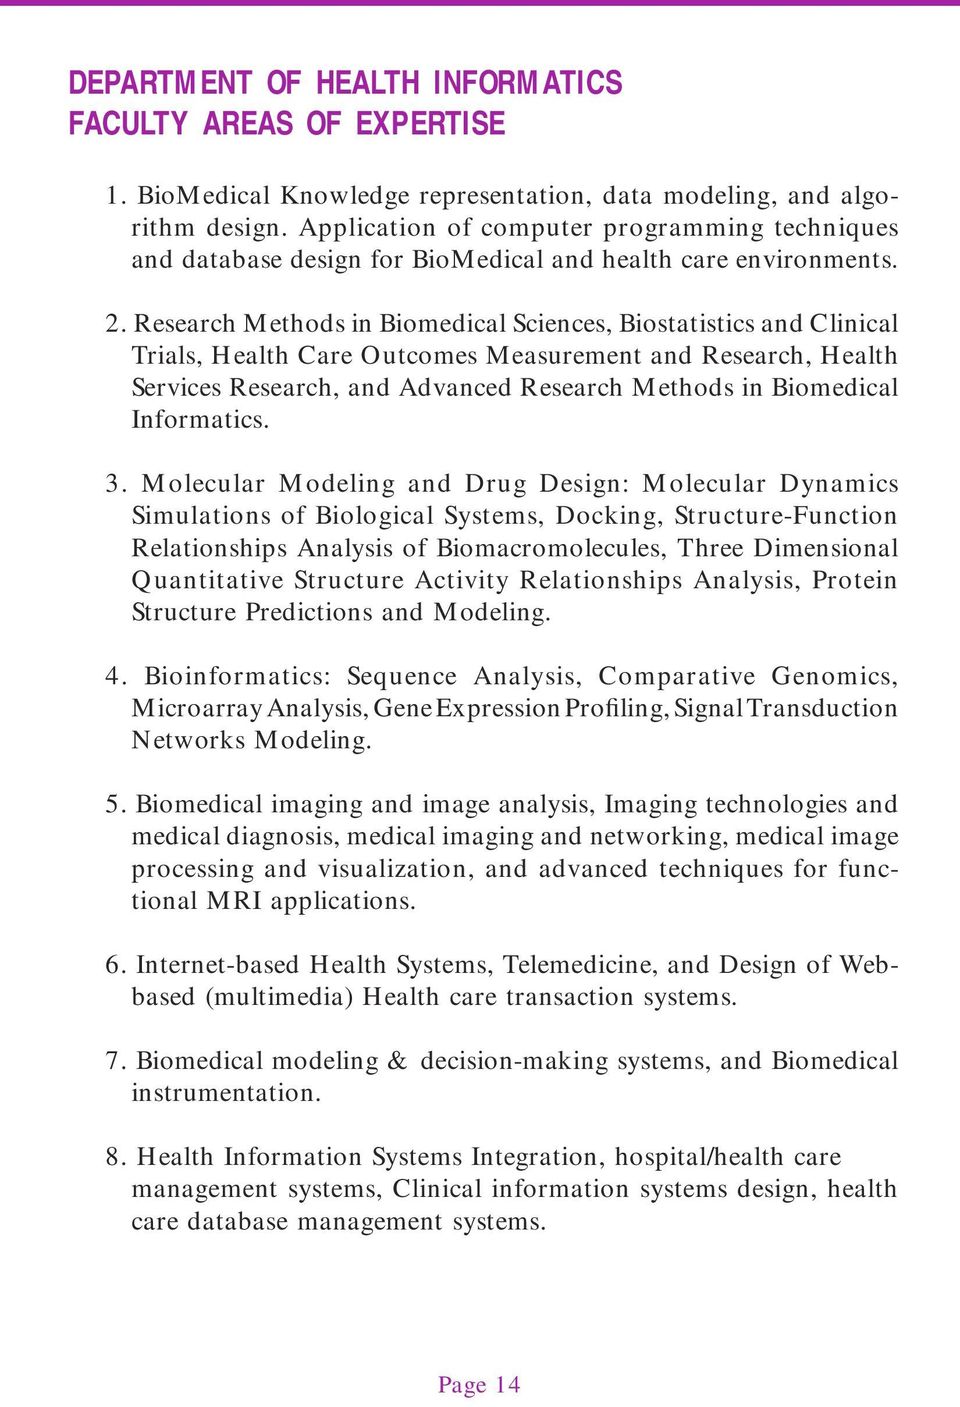 Research Methods in Biomedical Sciences, Biostatistics and Clinical Trials, Health Care Outcomes Measurement and Research, Health Services Research, and Advanced Research Methods in Biomedical